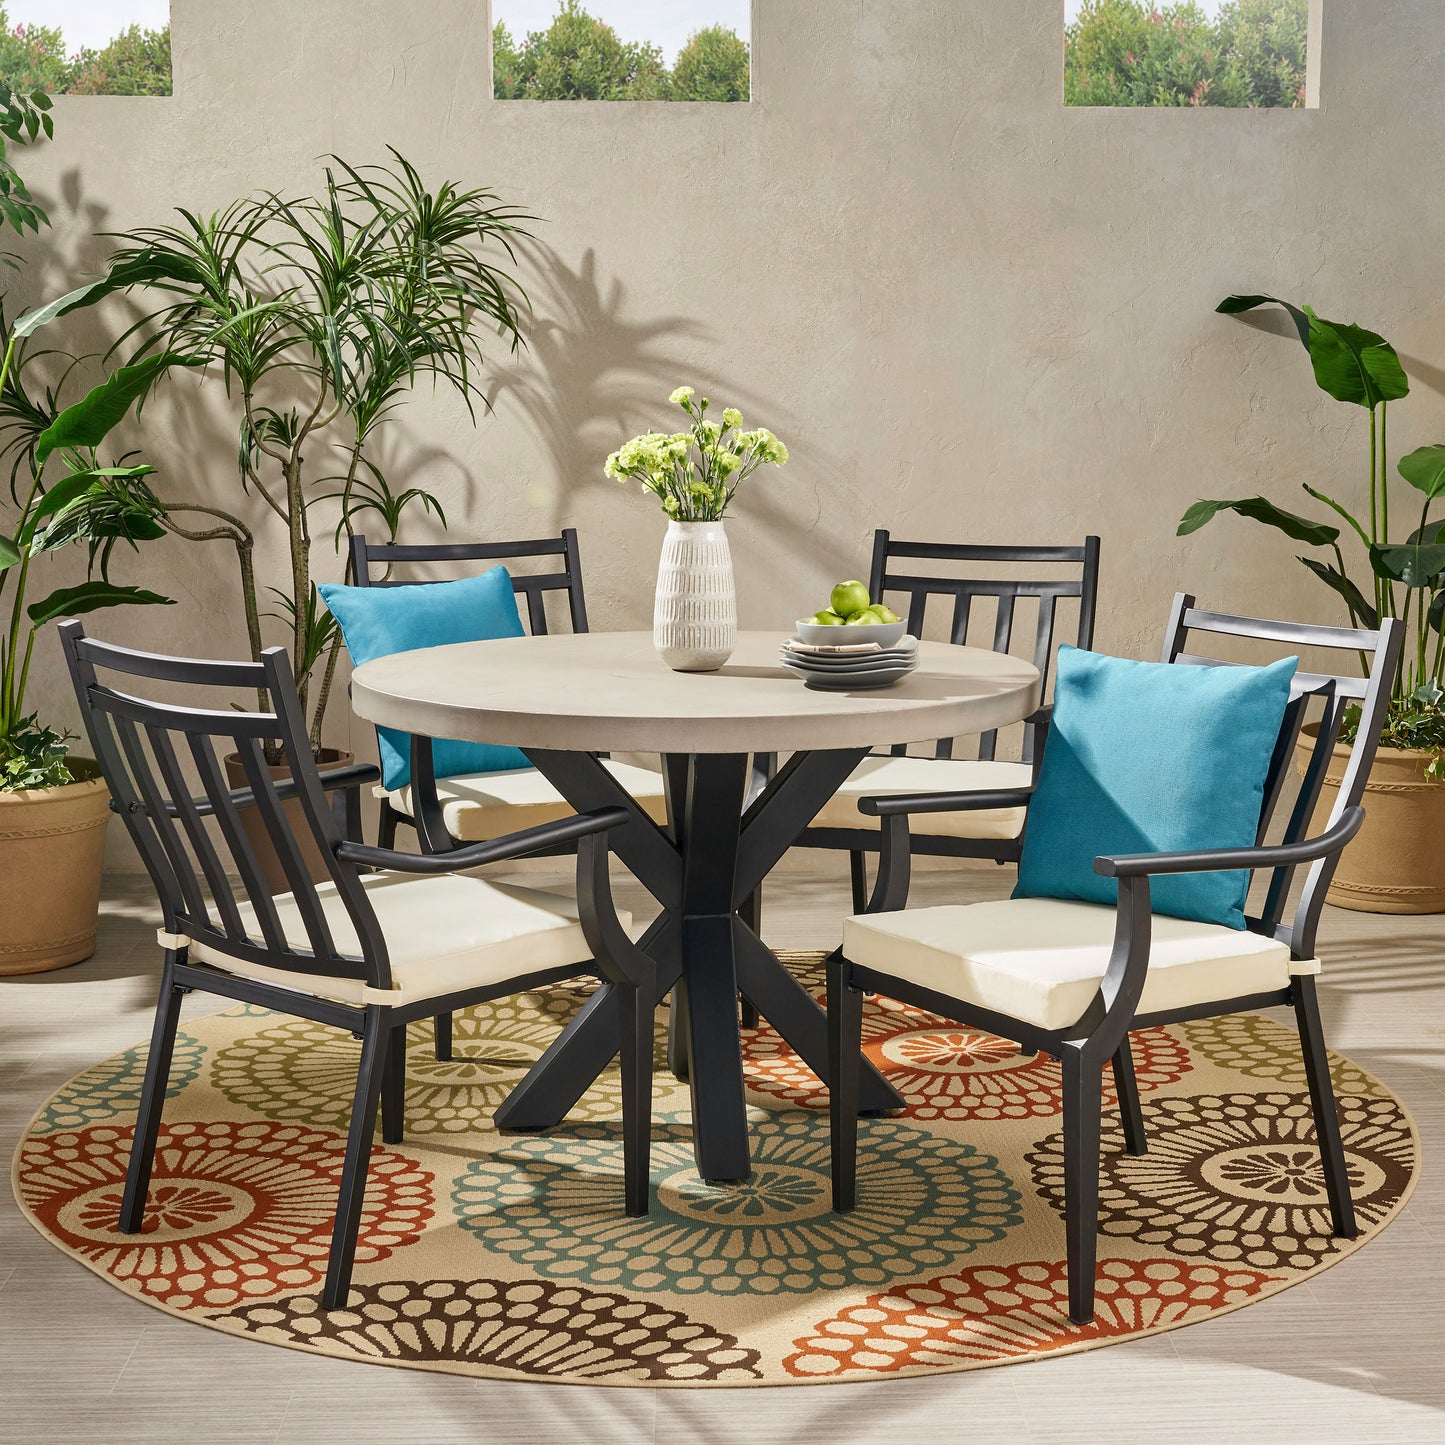 Olive Outdoor 5 Piece Dining Set with Light Weight Concrete Table